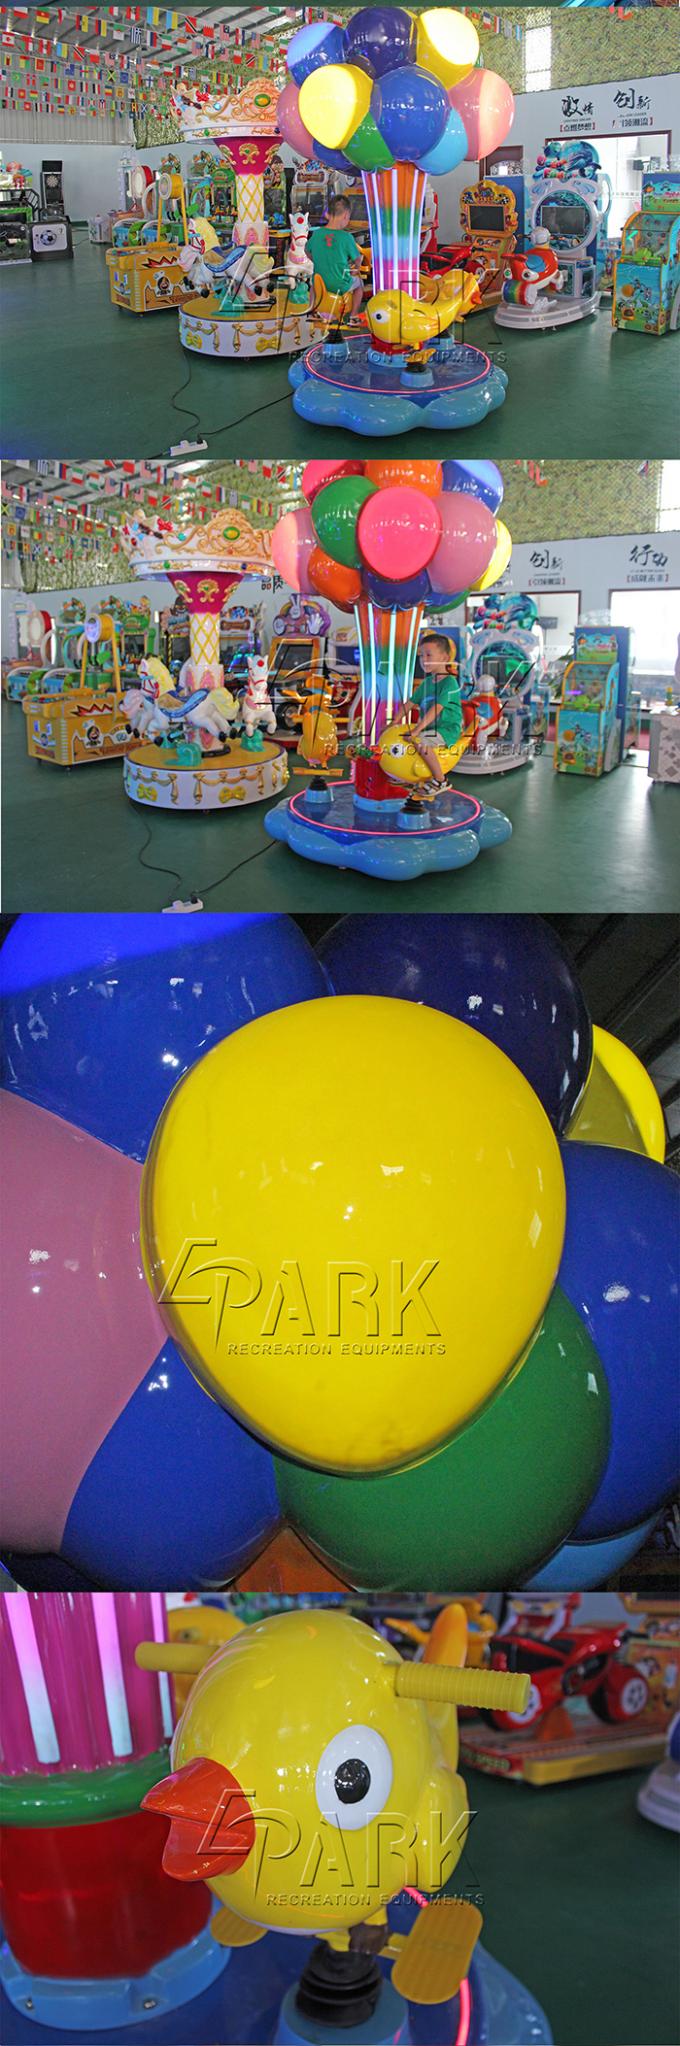 latest company news about Amusement Park  Kiddie rides on carousel  2